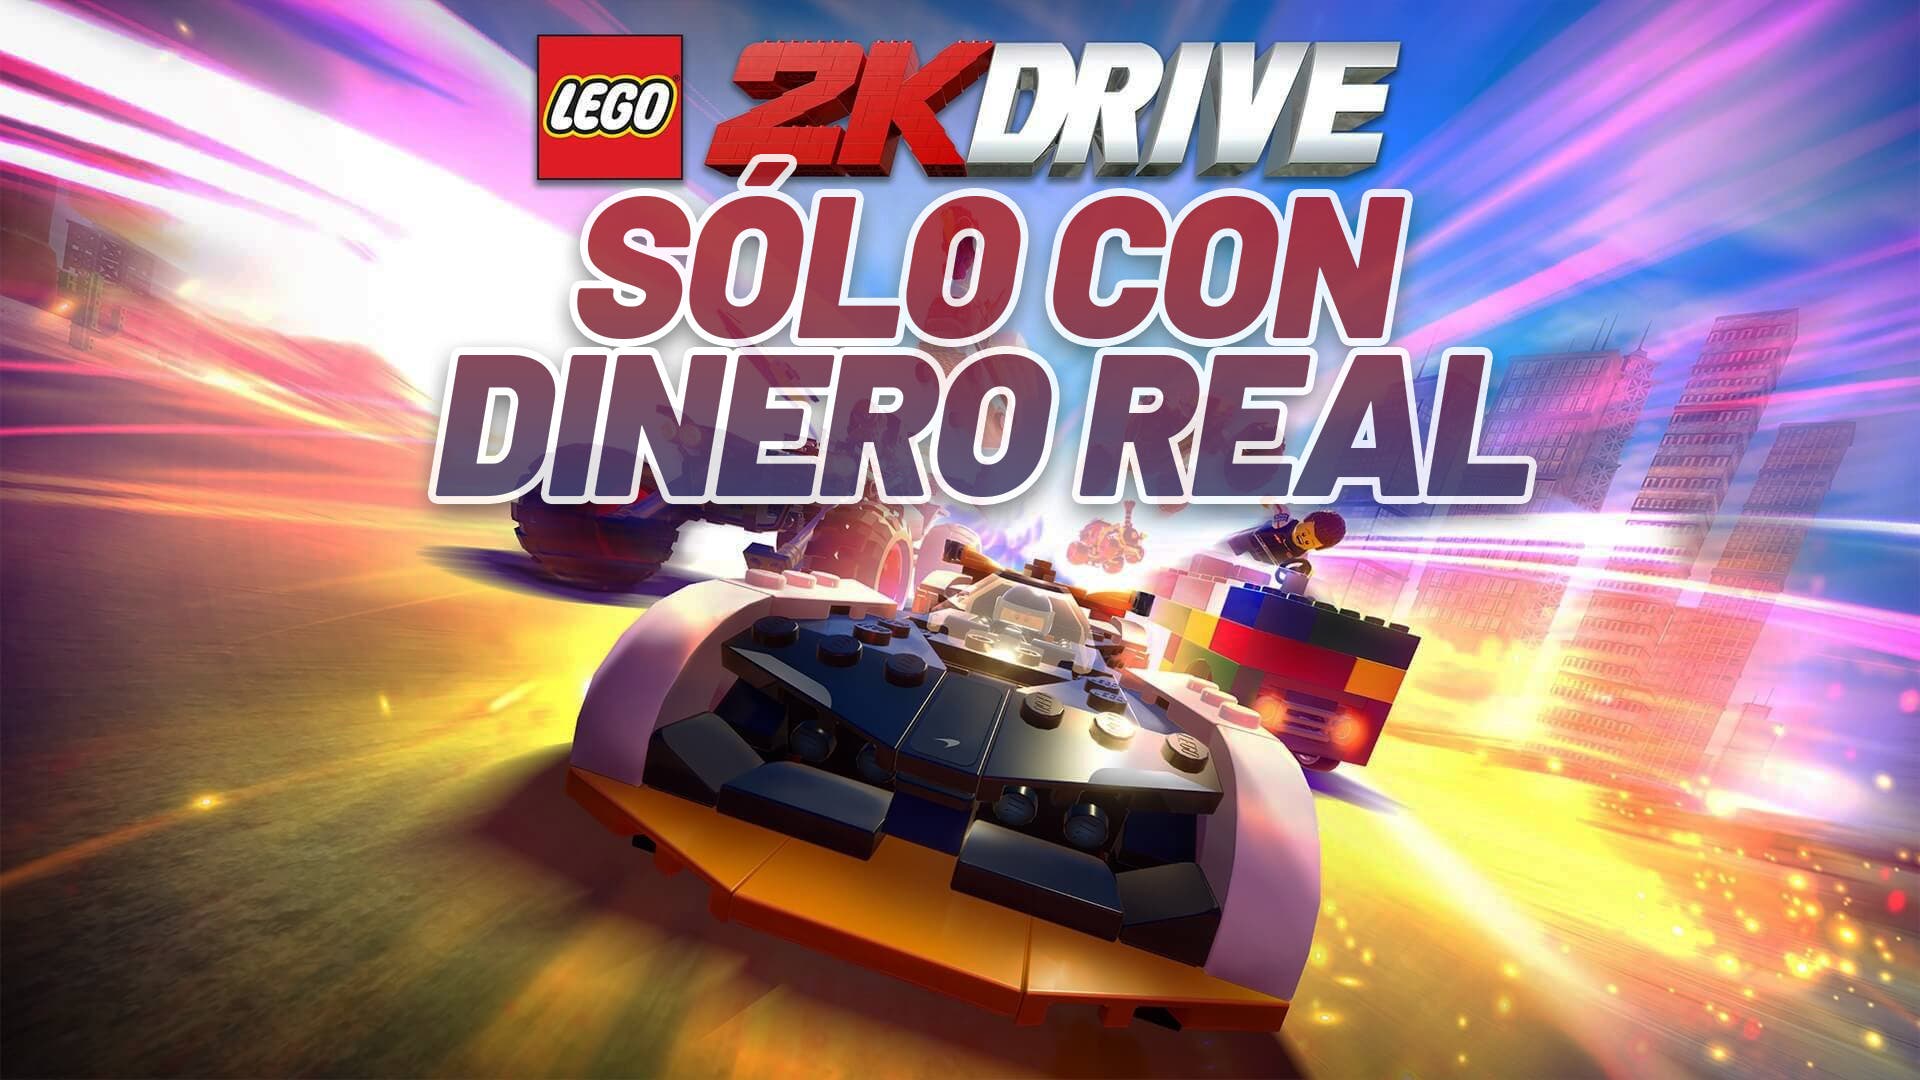 Lego 2K Drive will have items that can only be obtained by paying with real money